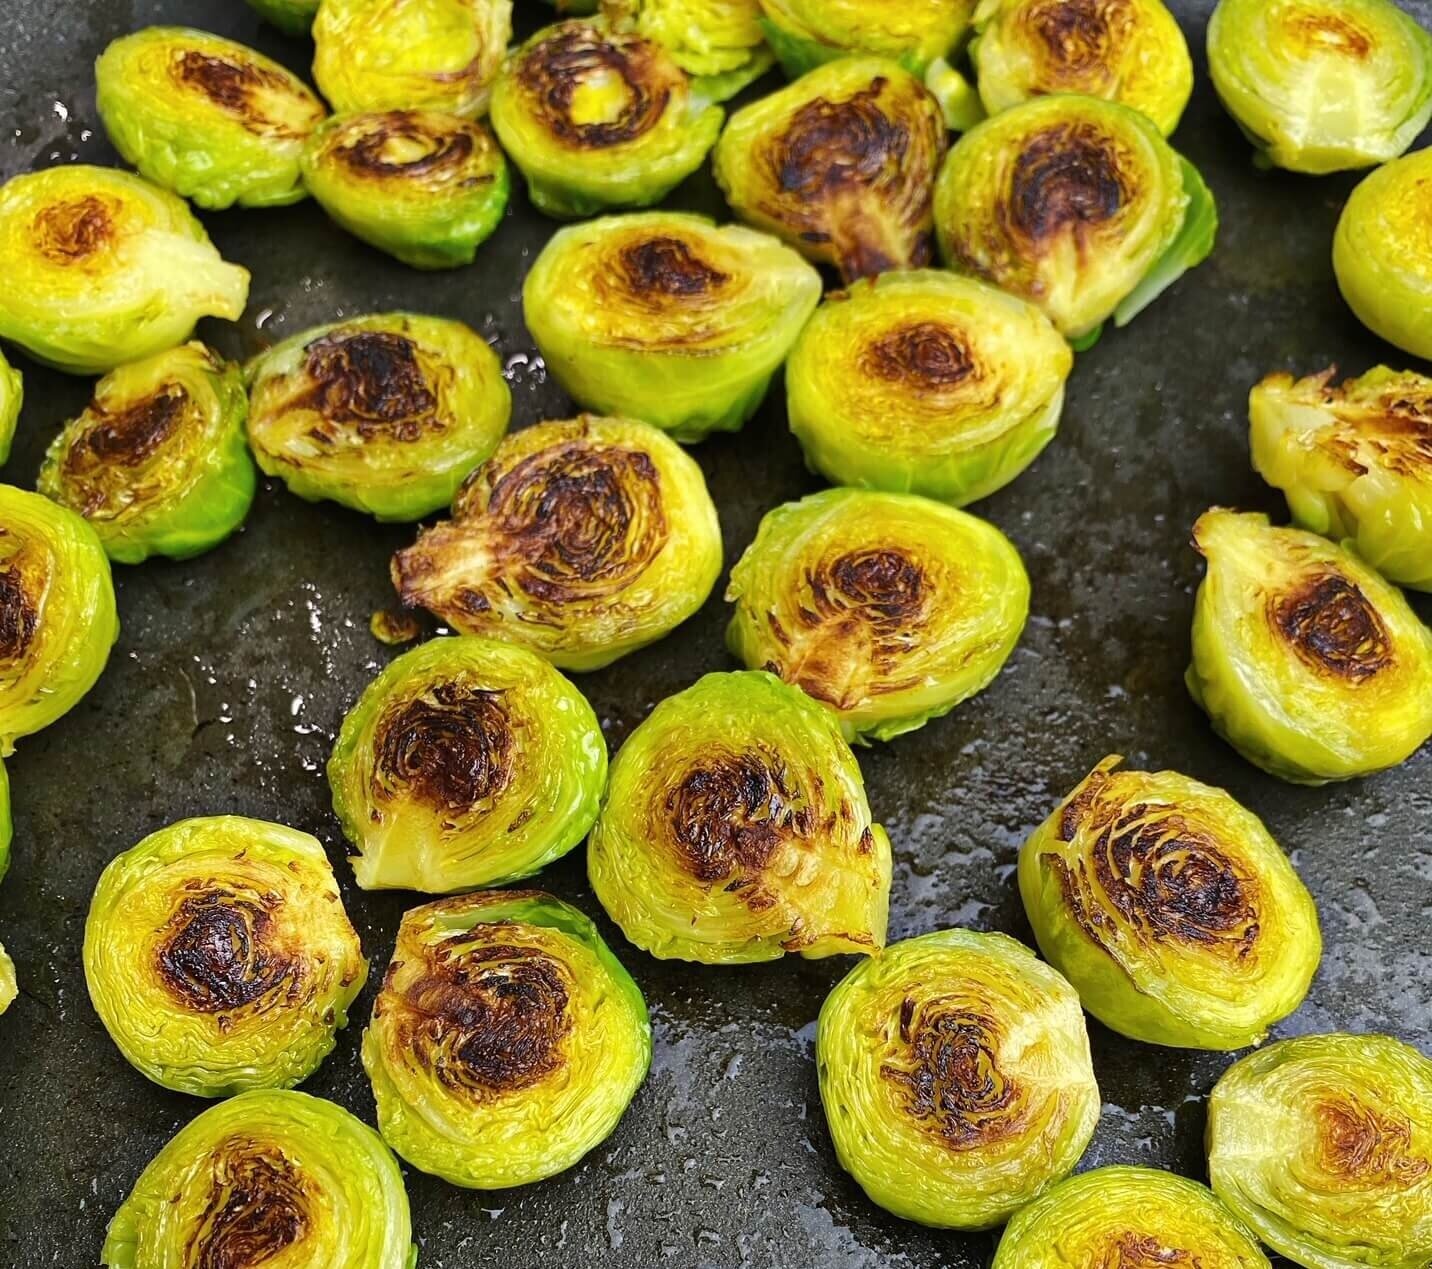 How to sautee brussel sprouts